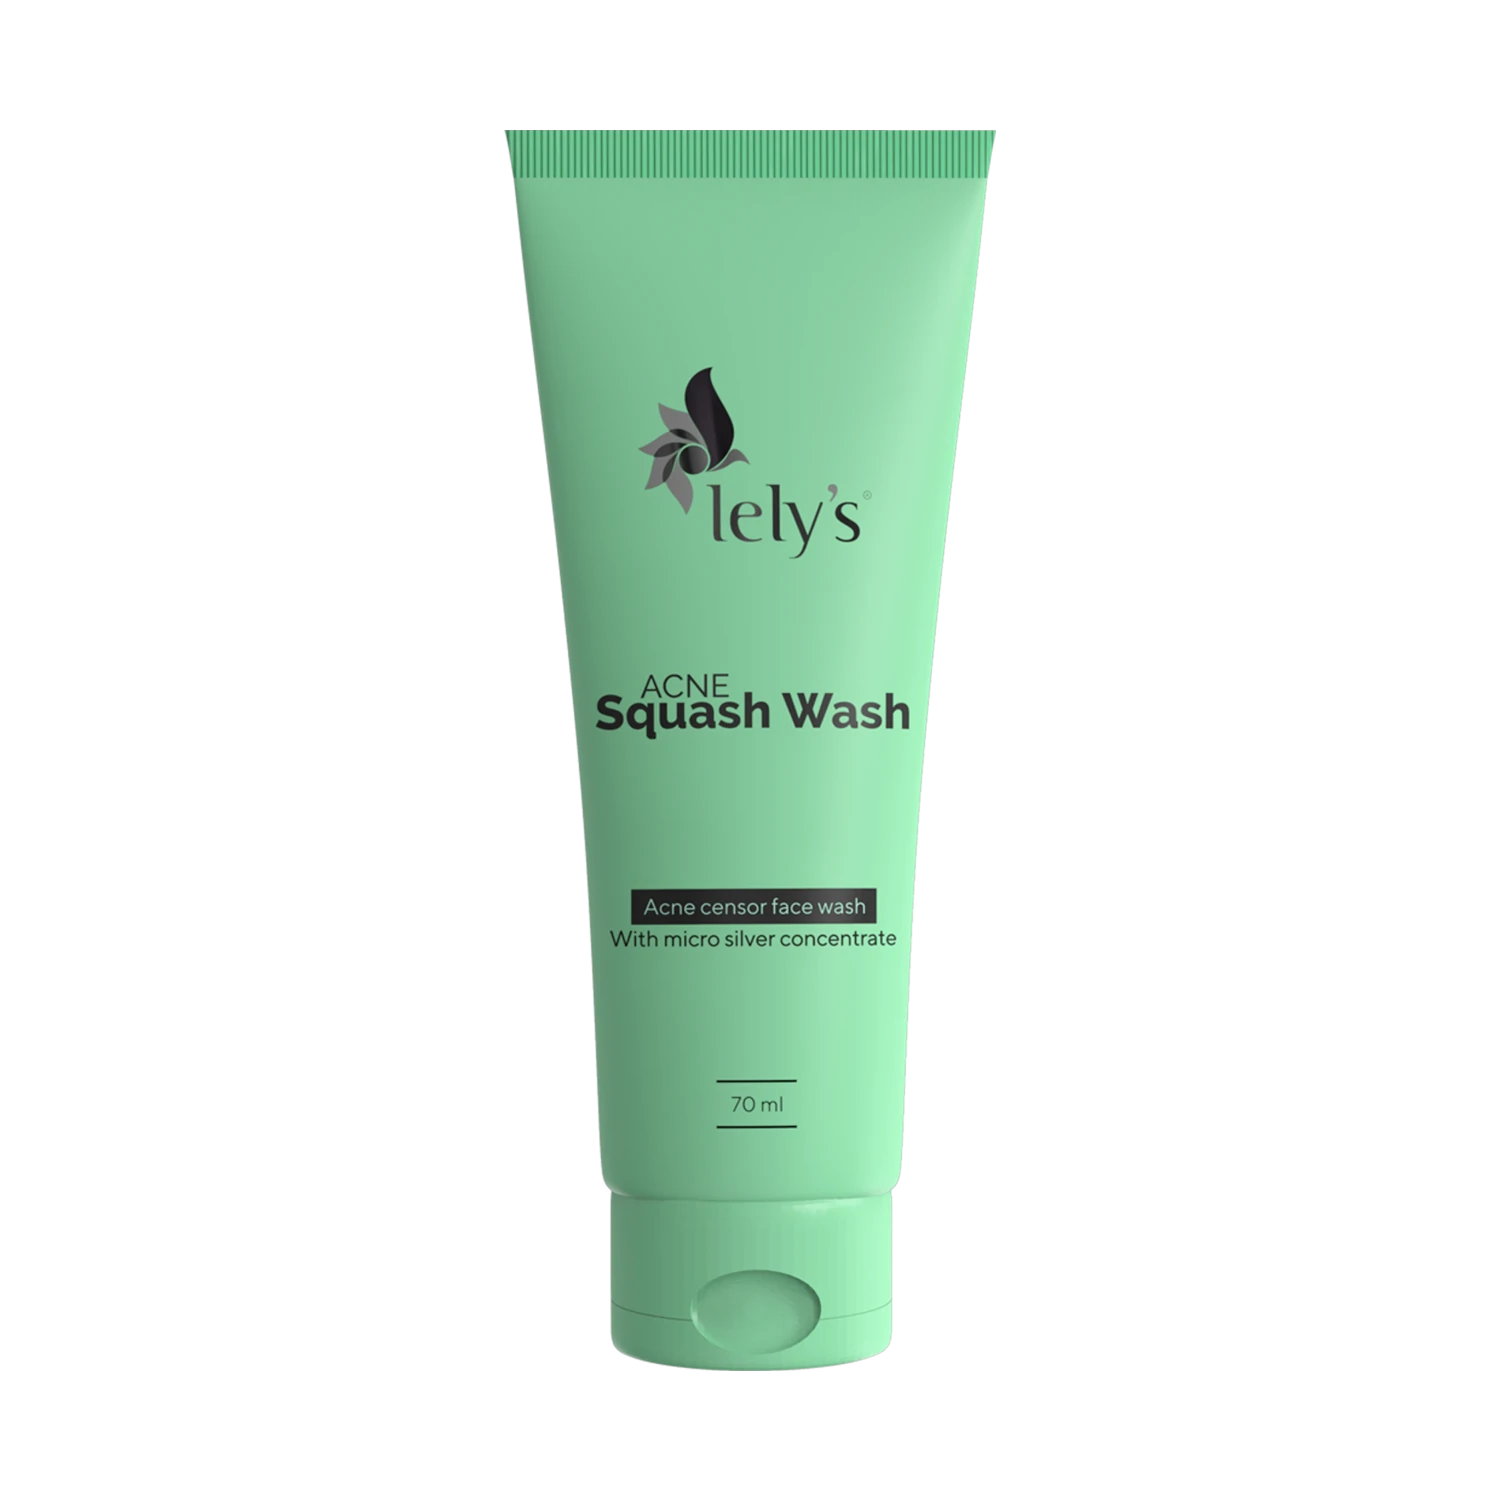 Acne Squash Wash from lelys for your acne